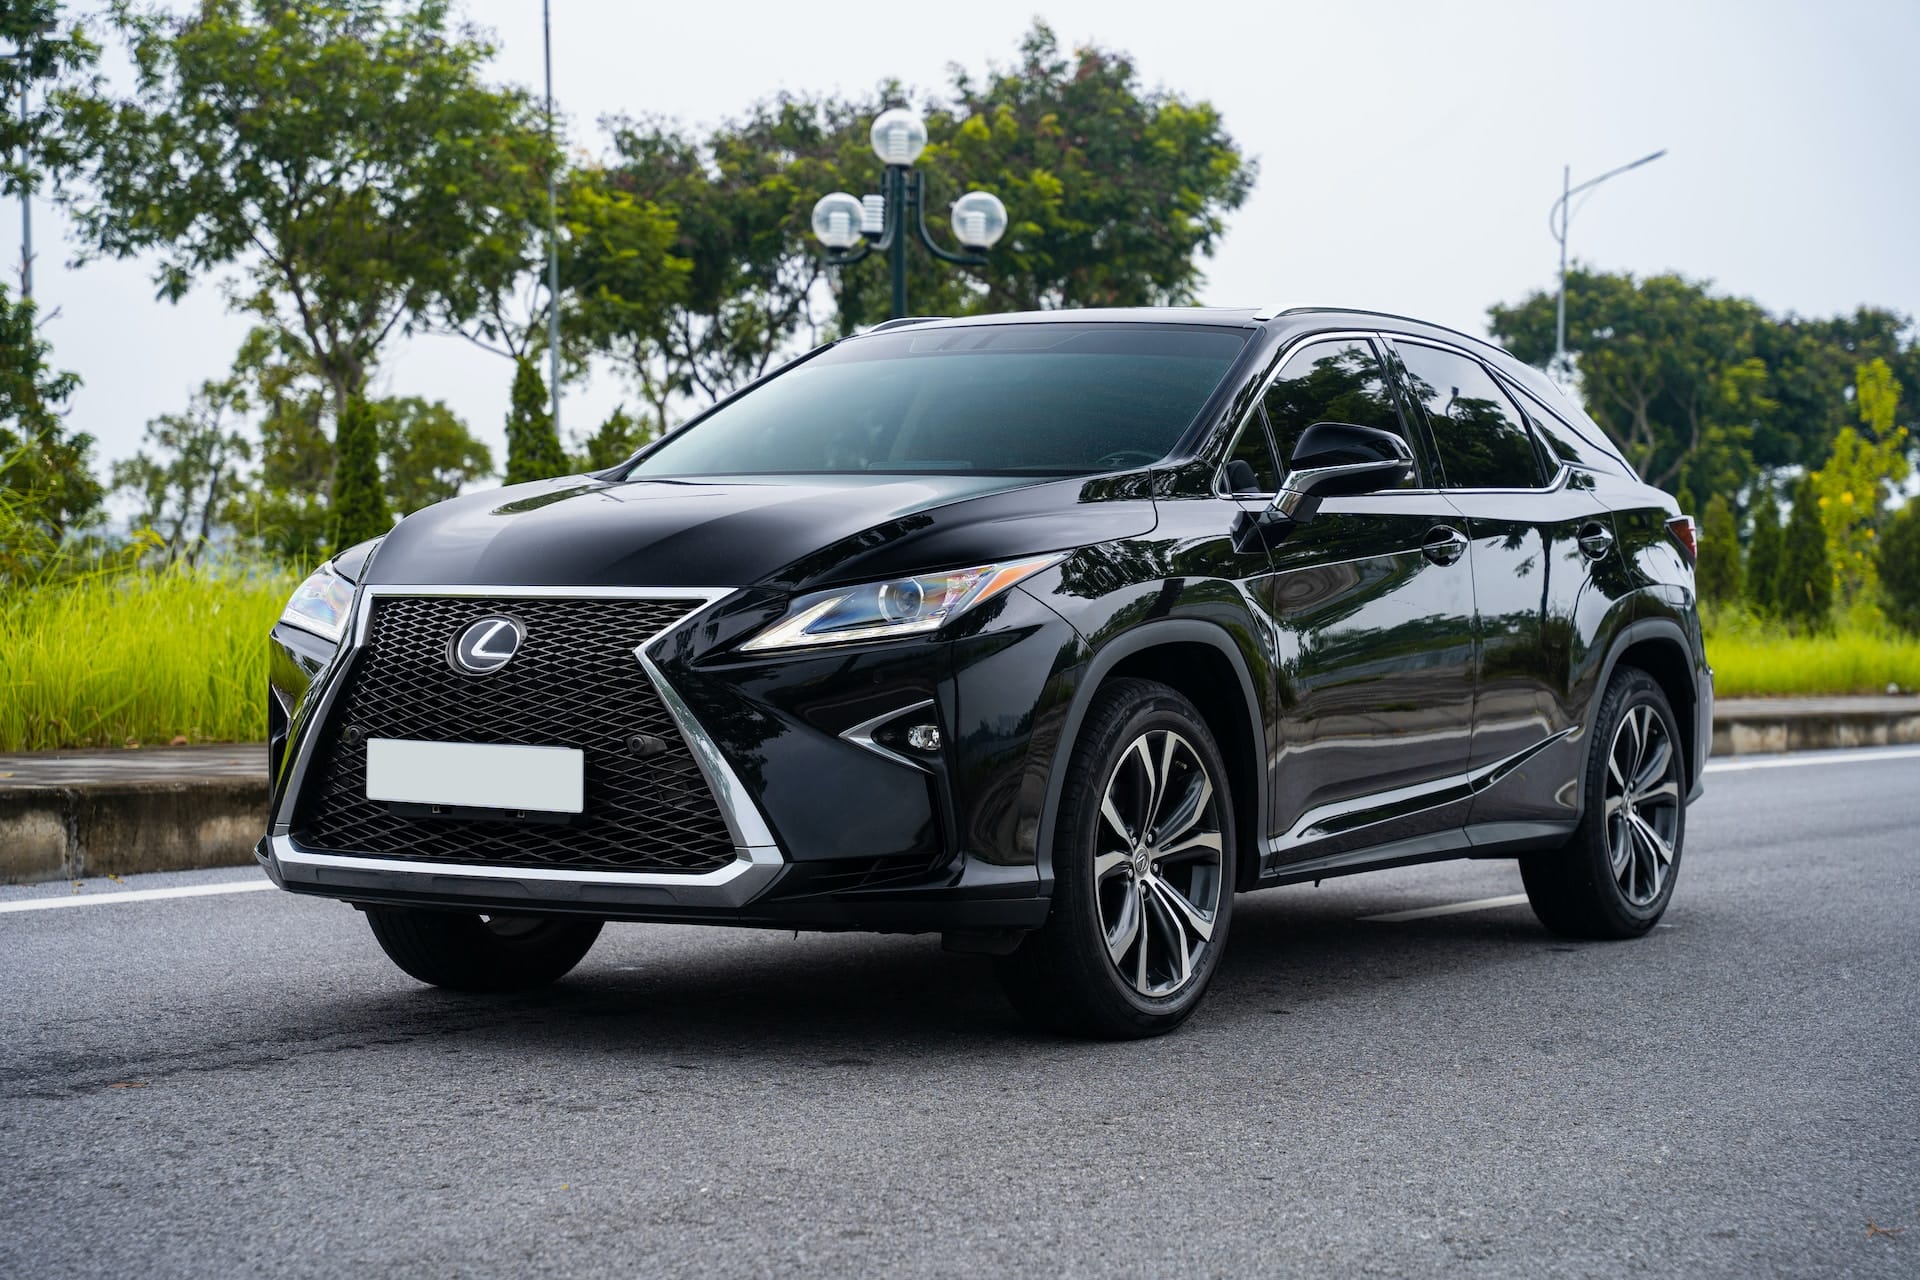 Things to Consider Before Shipping a Lexus RX